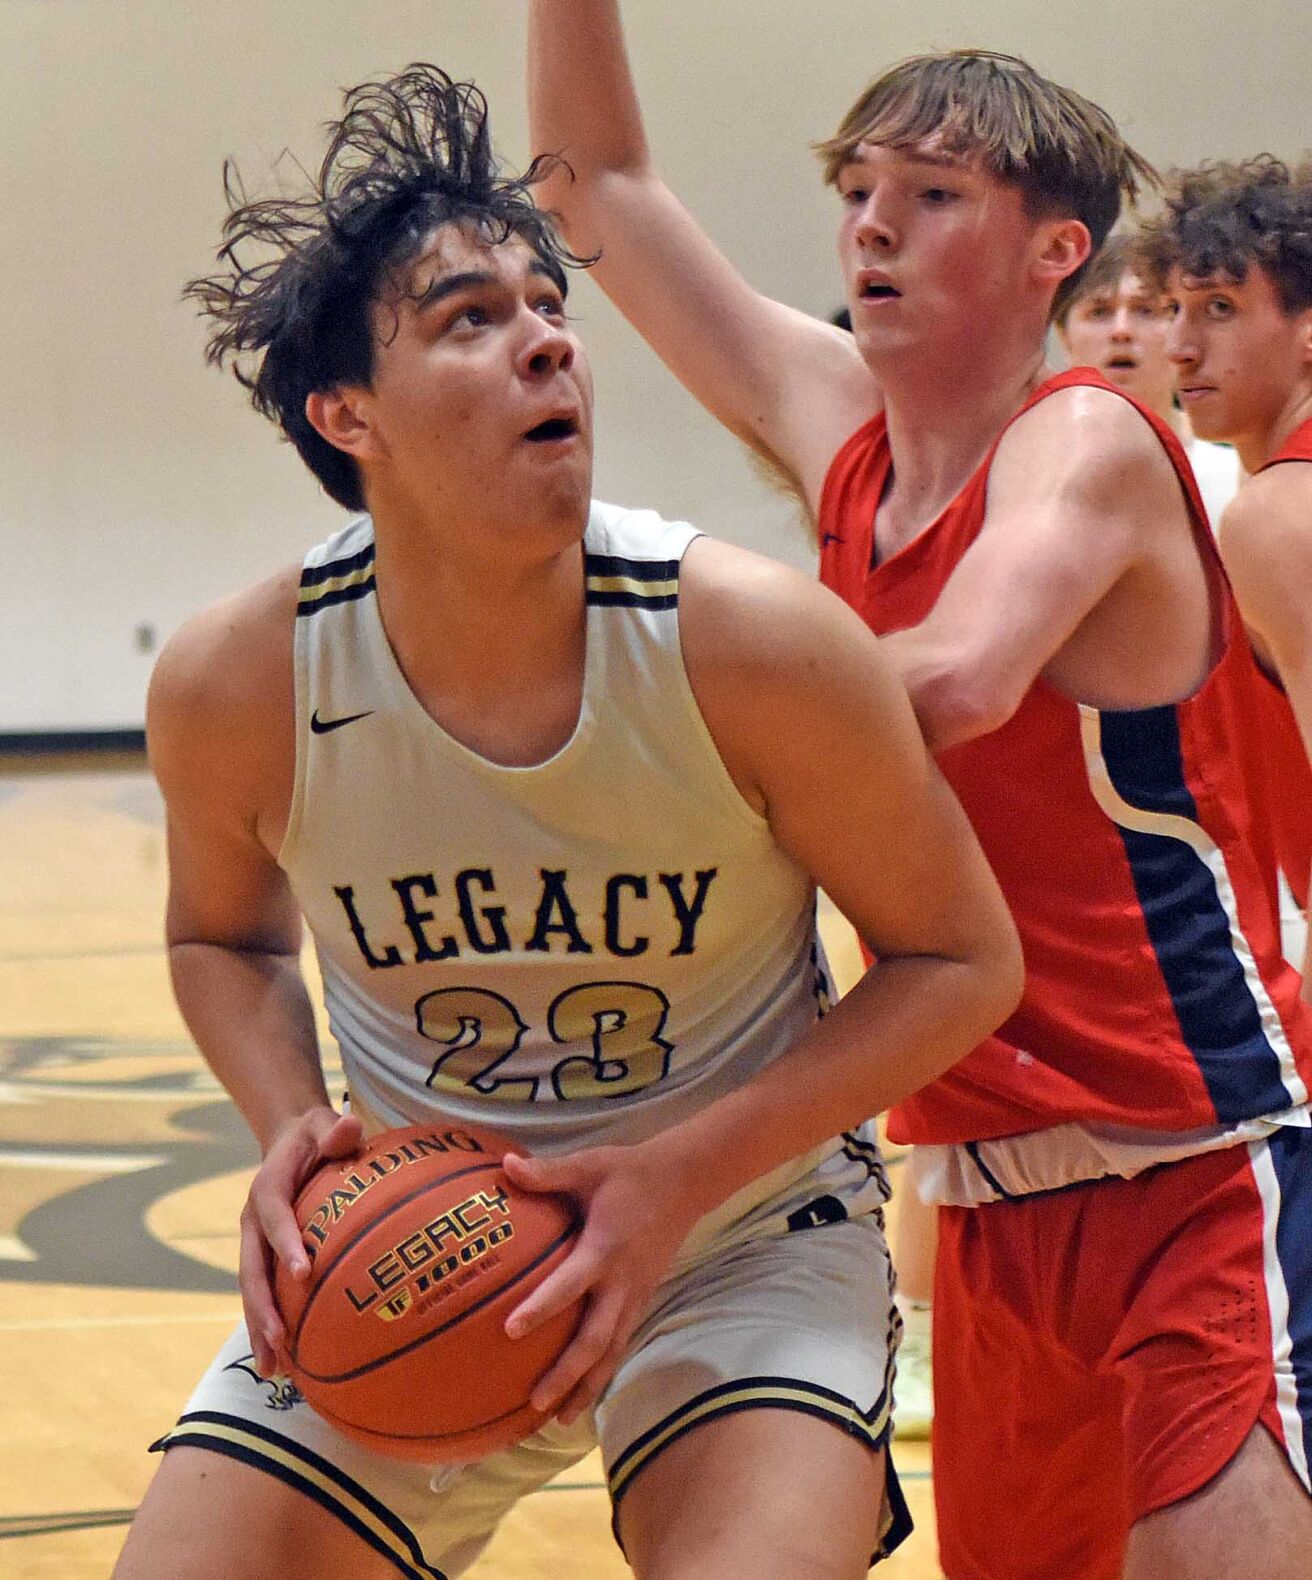 Century Patriots secure thrilling 82-78 victory over Legacy Sabers in basketball showdown